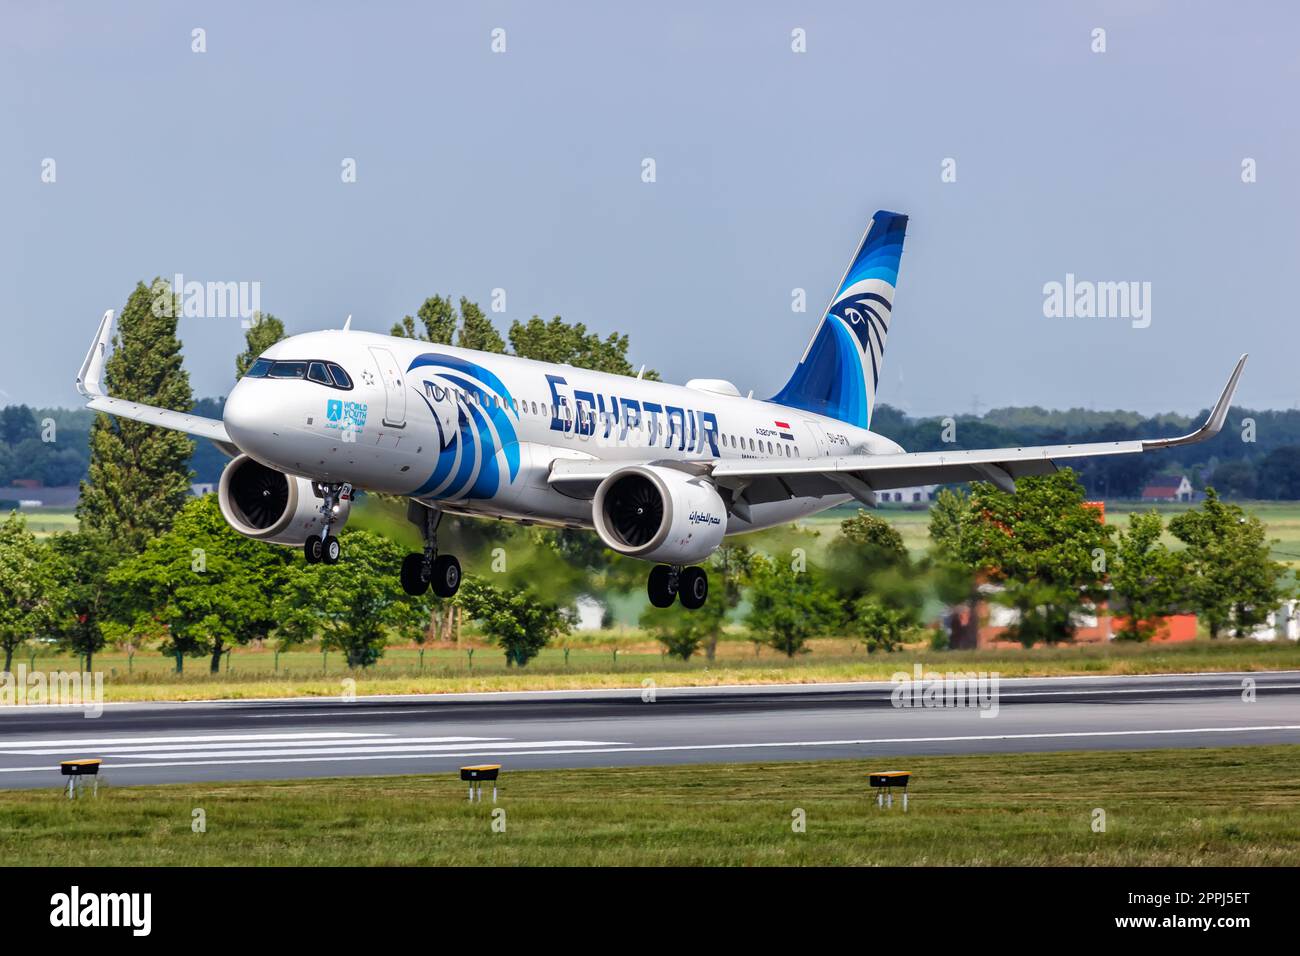 Egyptair Airbus A320neo airplane Brussels airport in Belgium Stock Photo